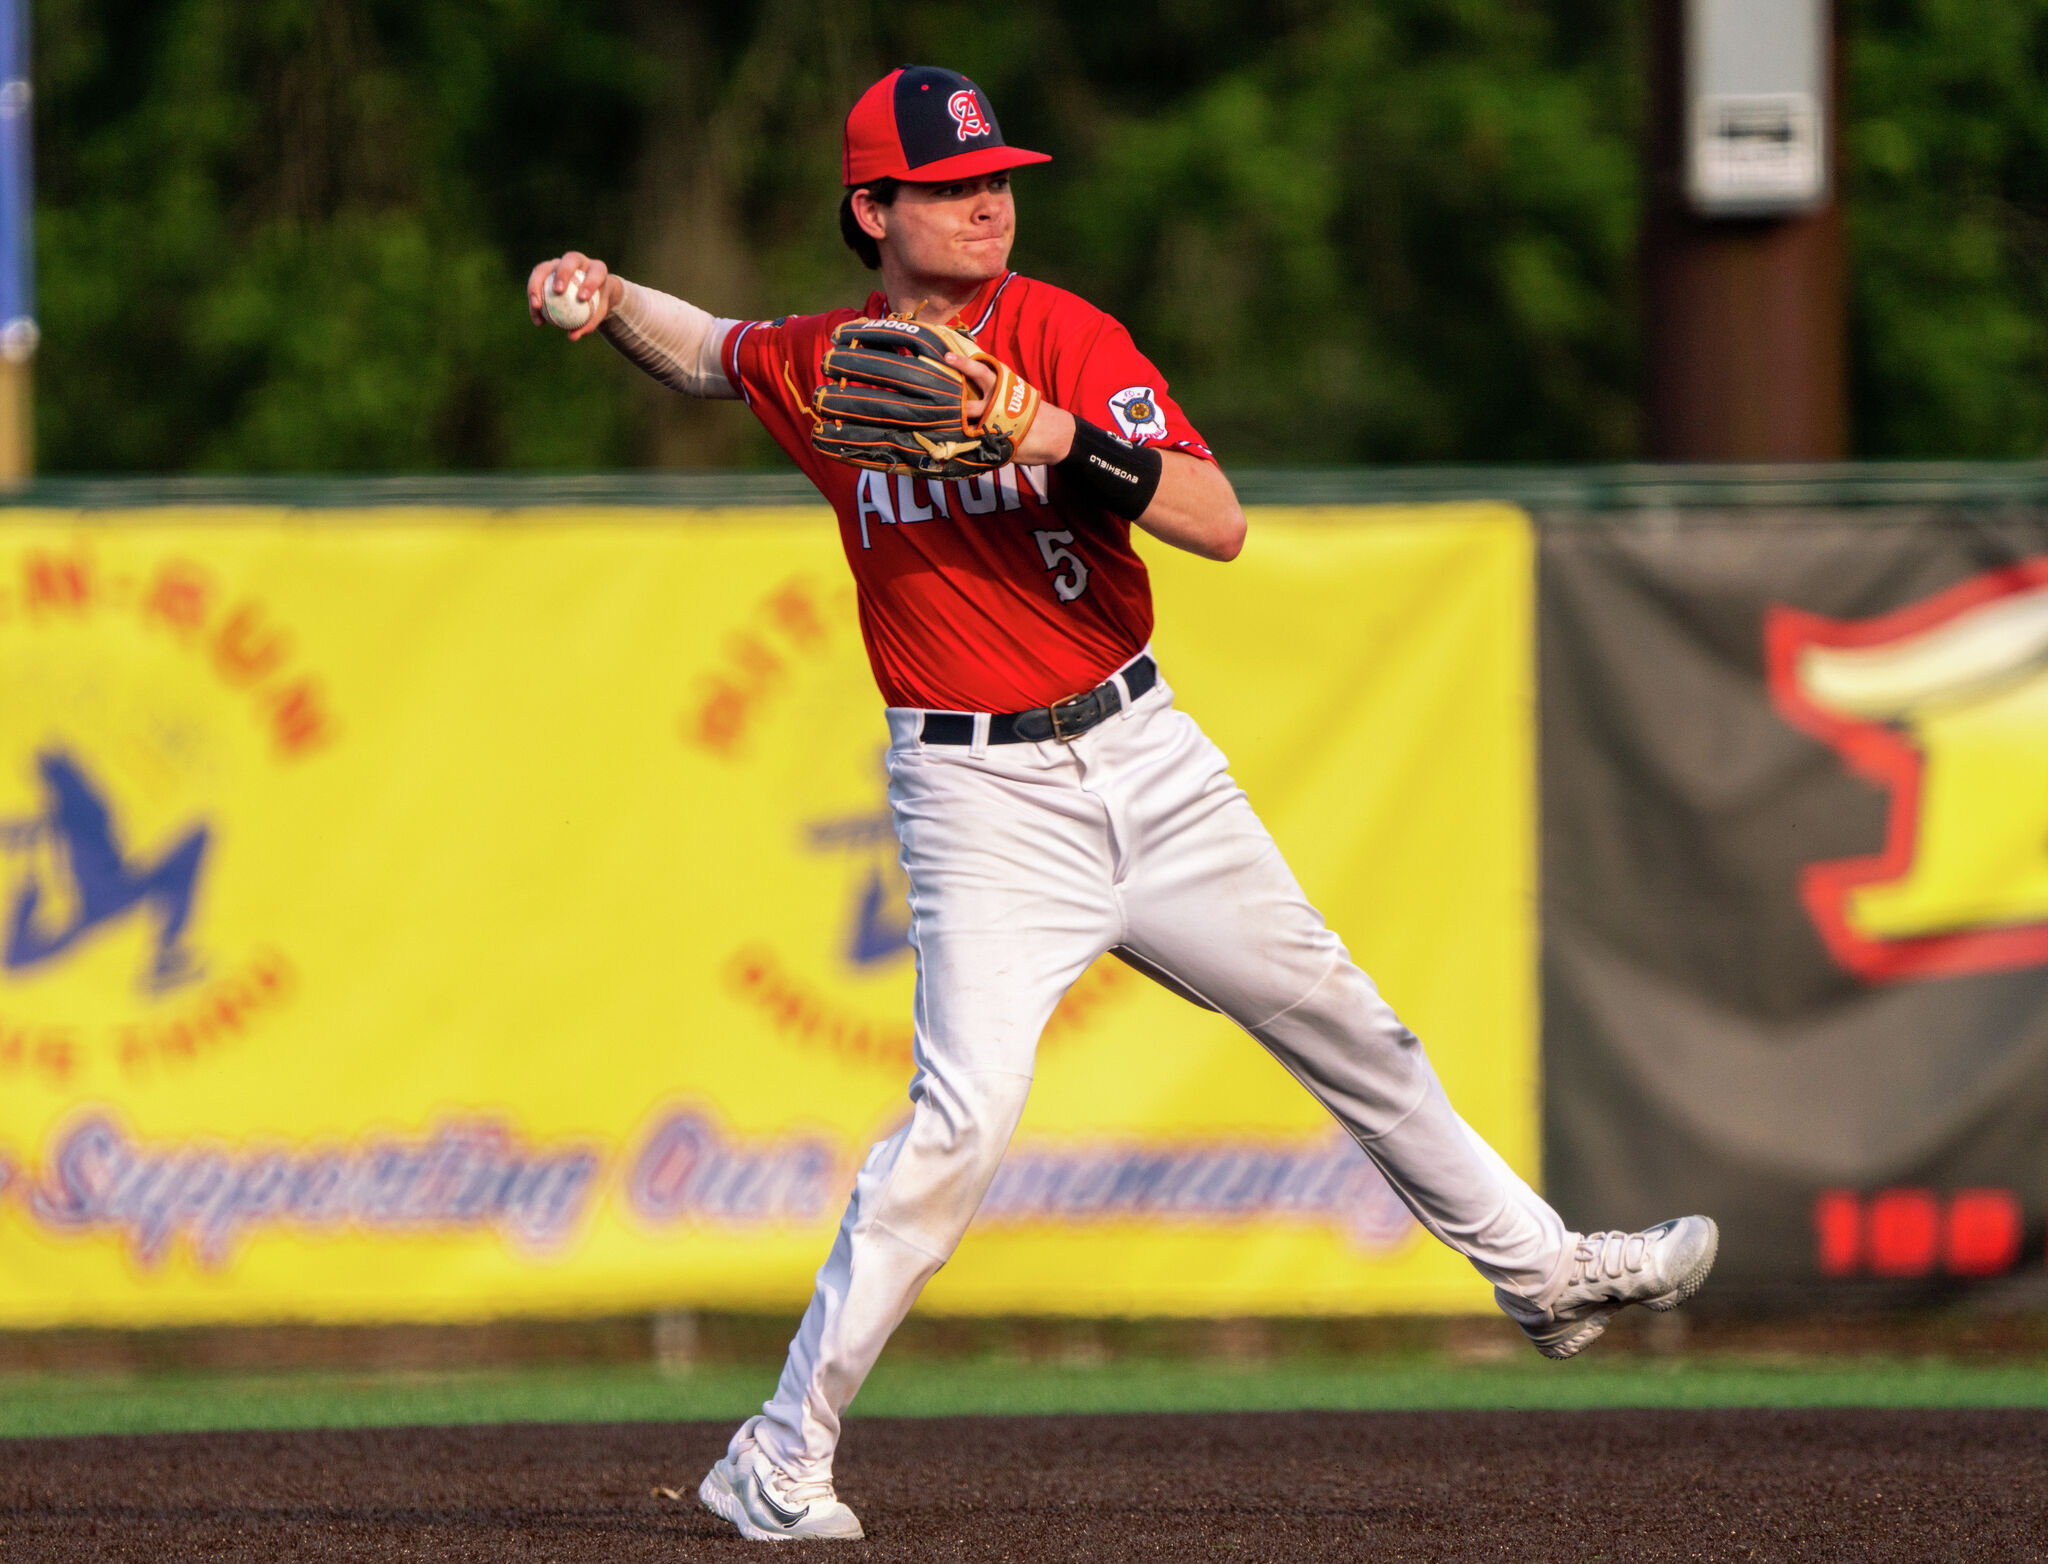 Alton Post 126 edges Manchester, Mo. 7-6, then downs Chesterfield 10-3